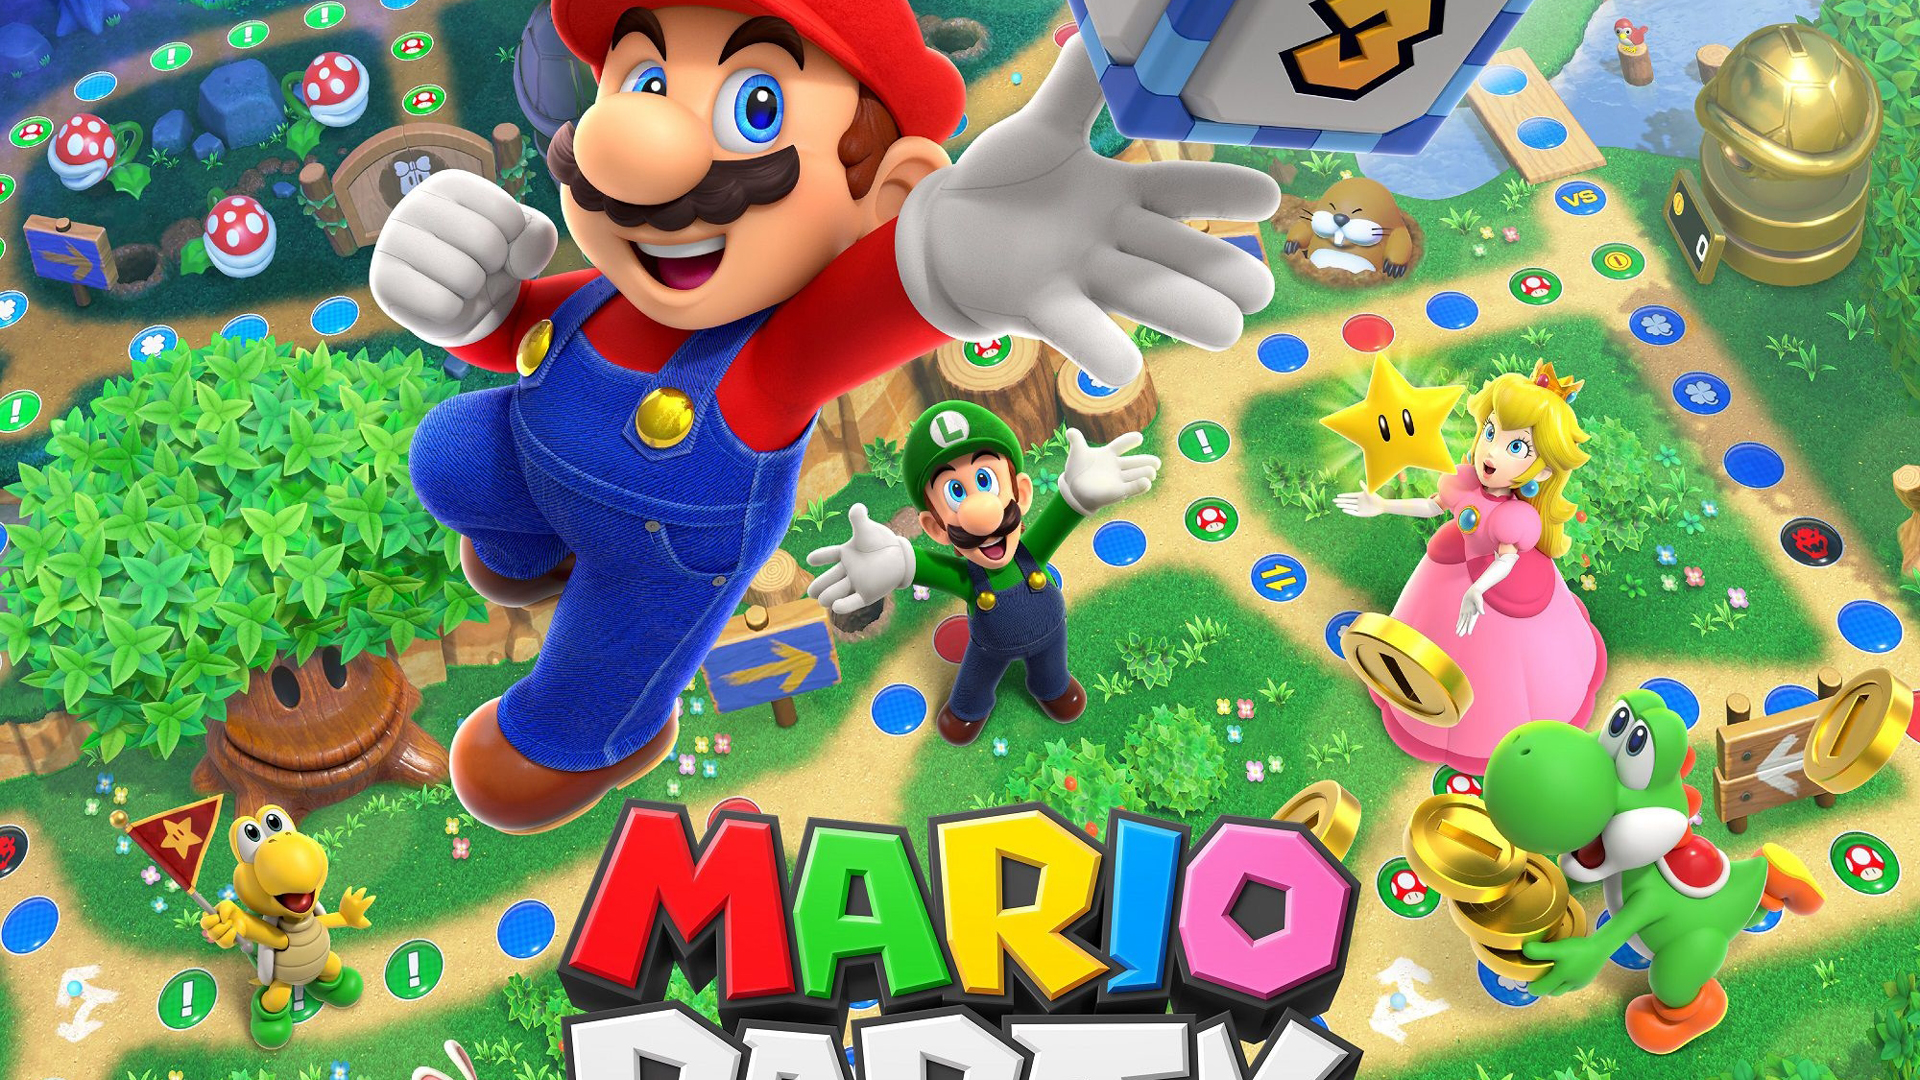 Super Mario Party phone wallpaper 1080P 2k 4k Full HD Wallpapers  Backgrounds Free Download  Wallpaper Crafter